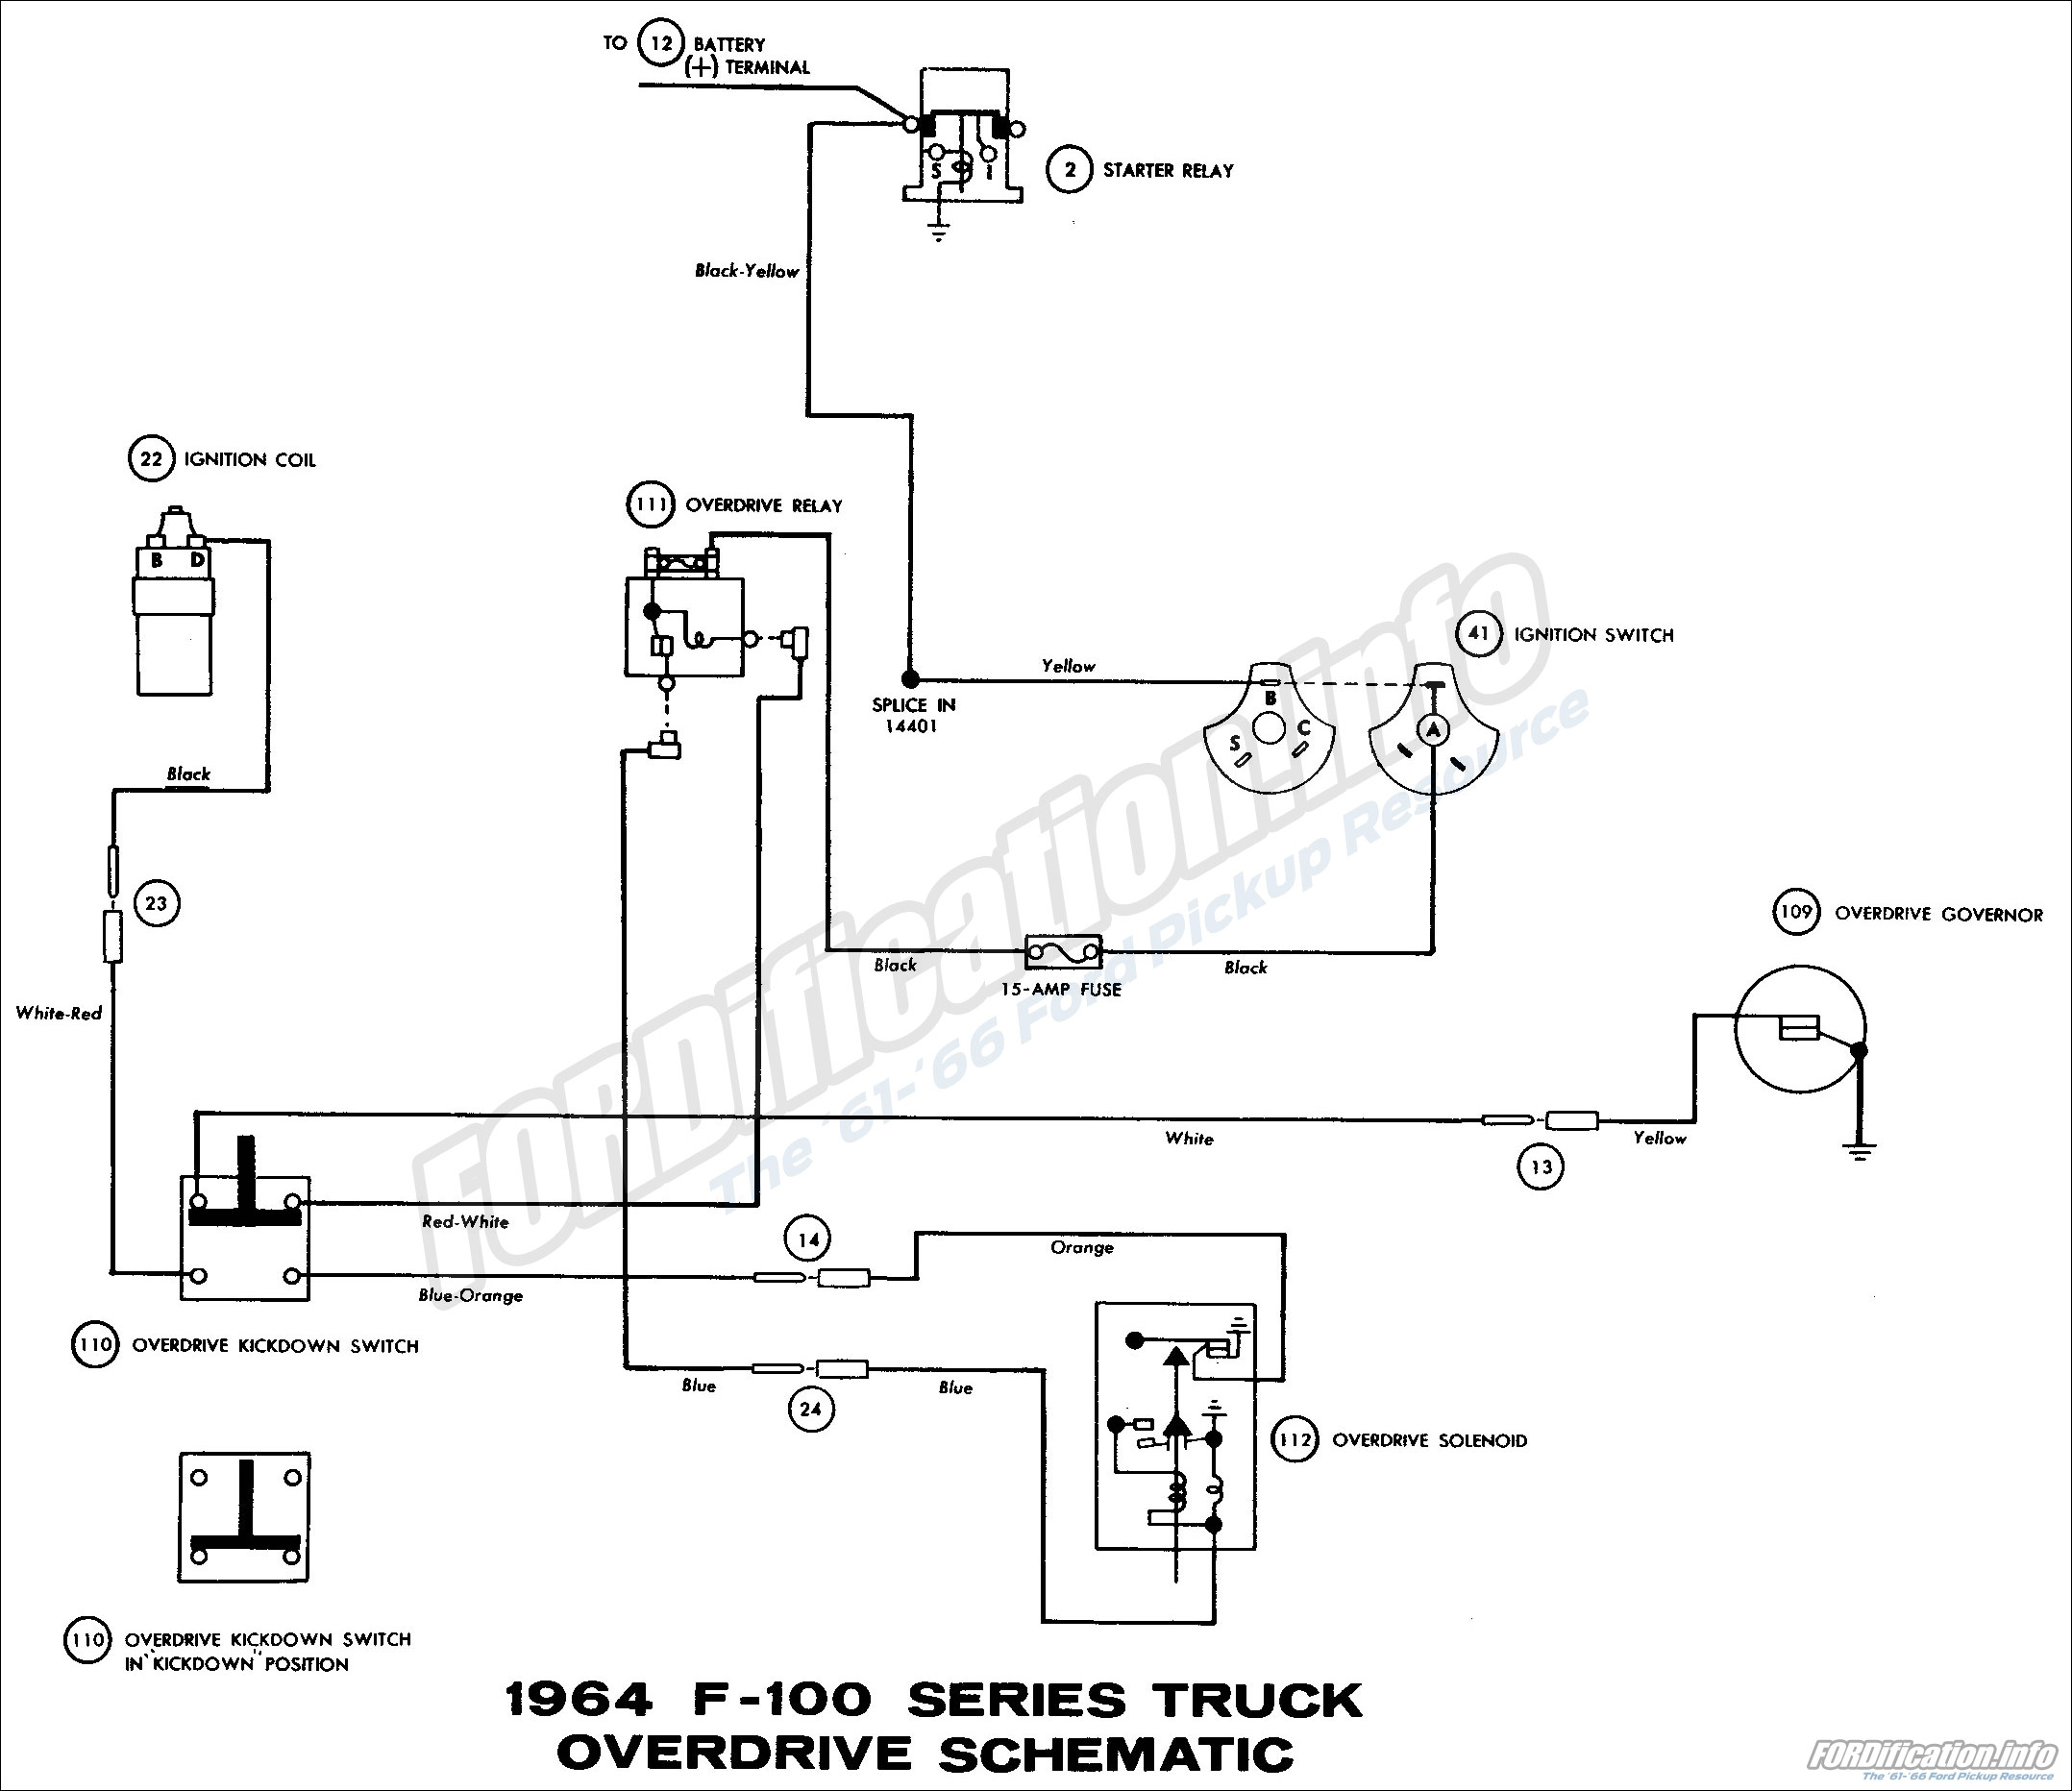 1959 Ford F100 Wiring Diagram from www.fordification.info